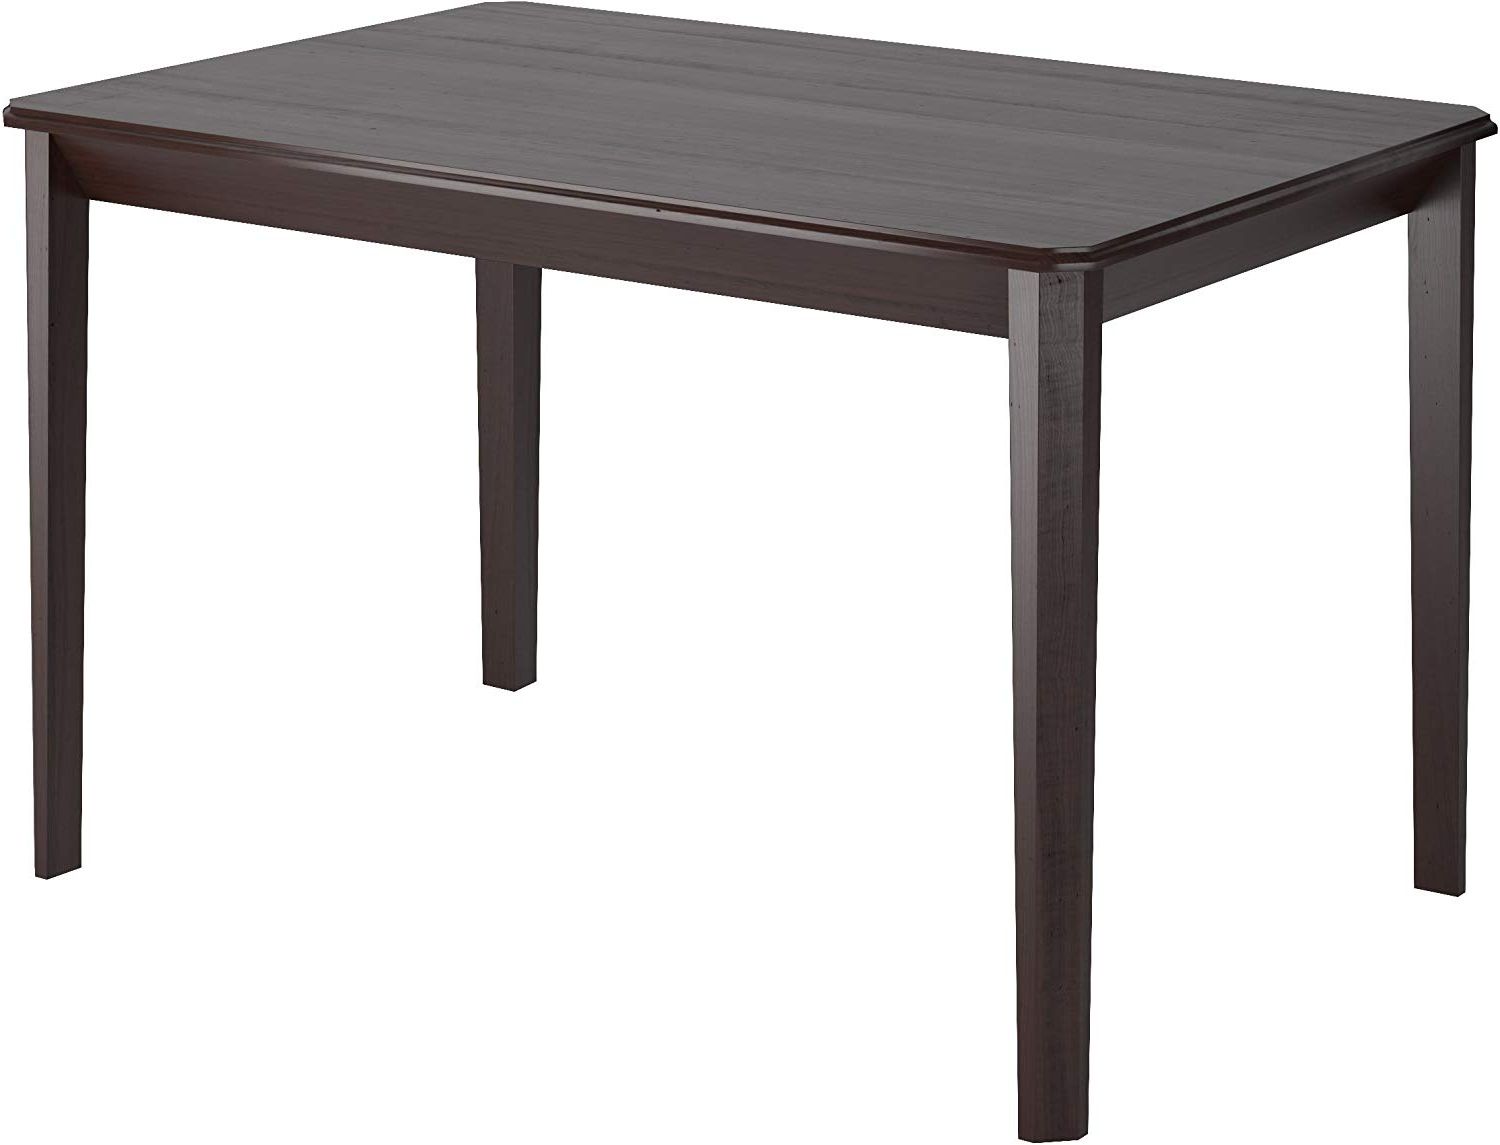 Latest Amazon – Corliving Atwood Dining Table, 47", Cappuccino Regarding Atwood Transitional Square Dining Tables (Photo 1 of 25)